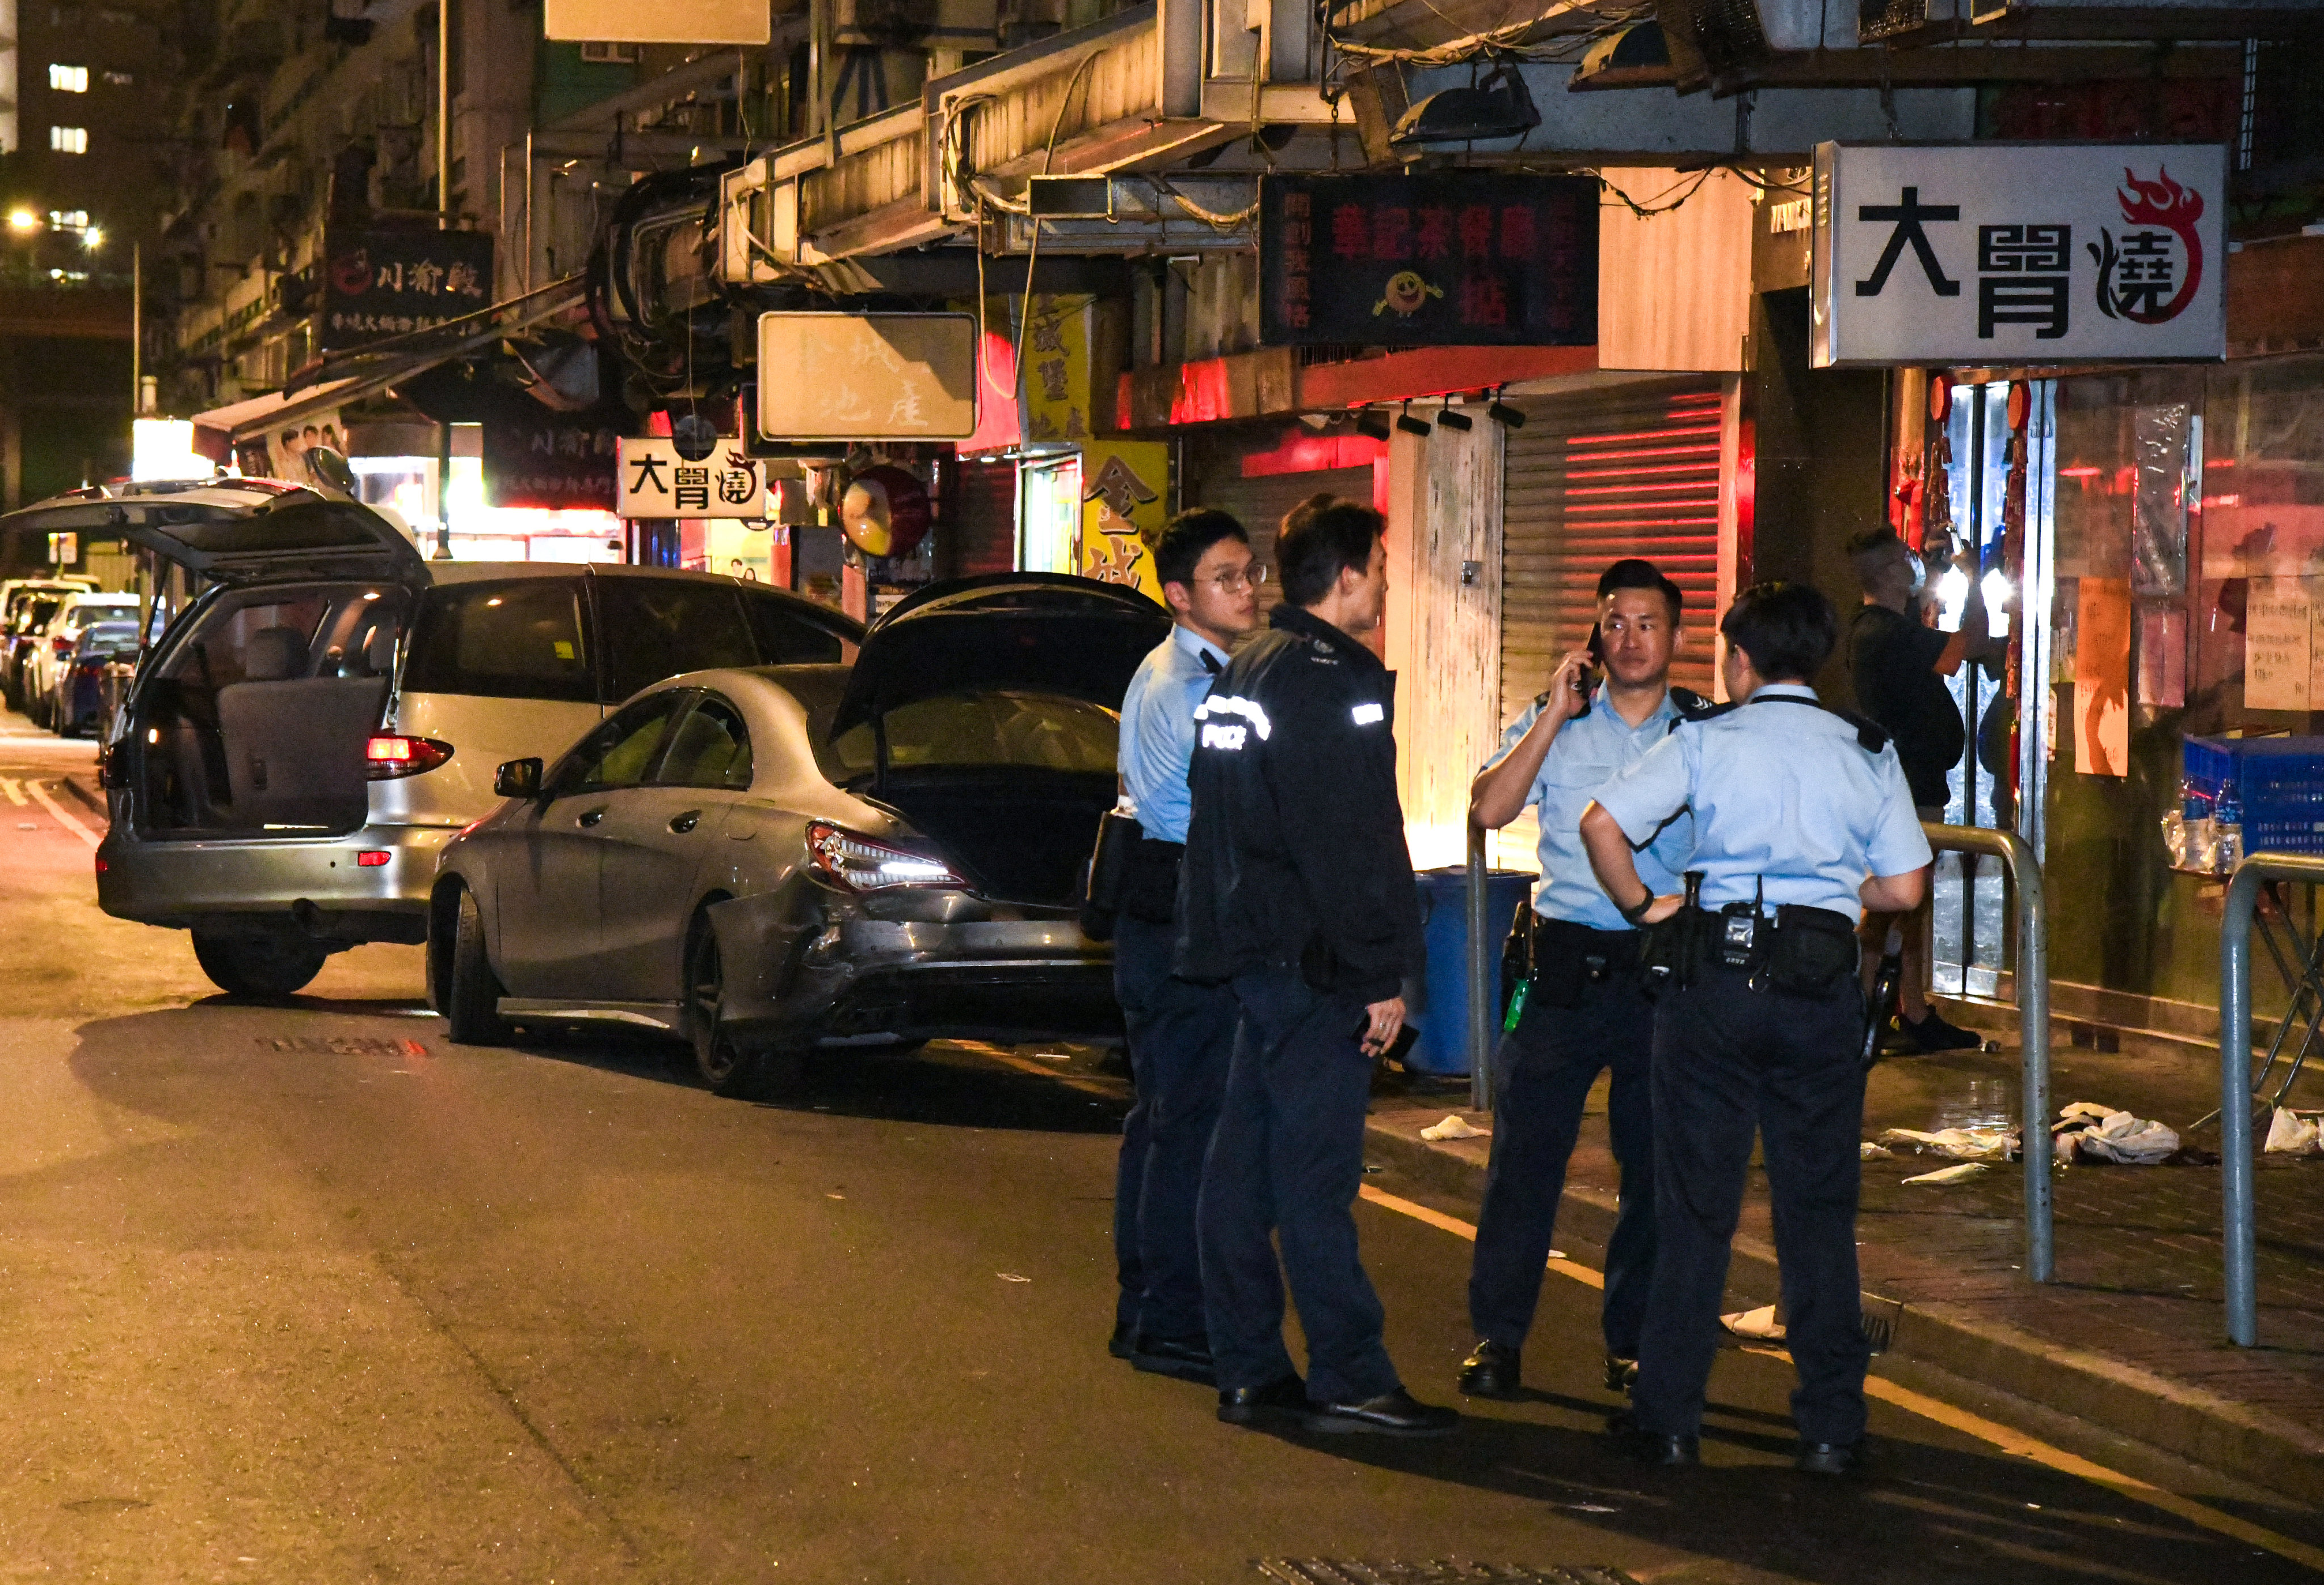 Hong Kong police are searching for at least six knife-wielding assailants. Photo: Handout